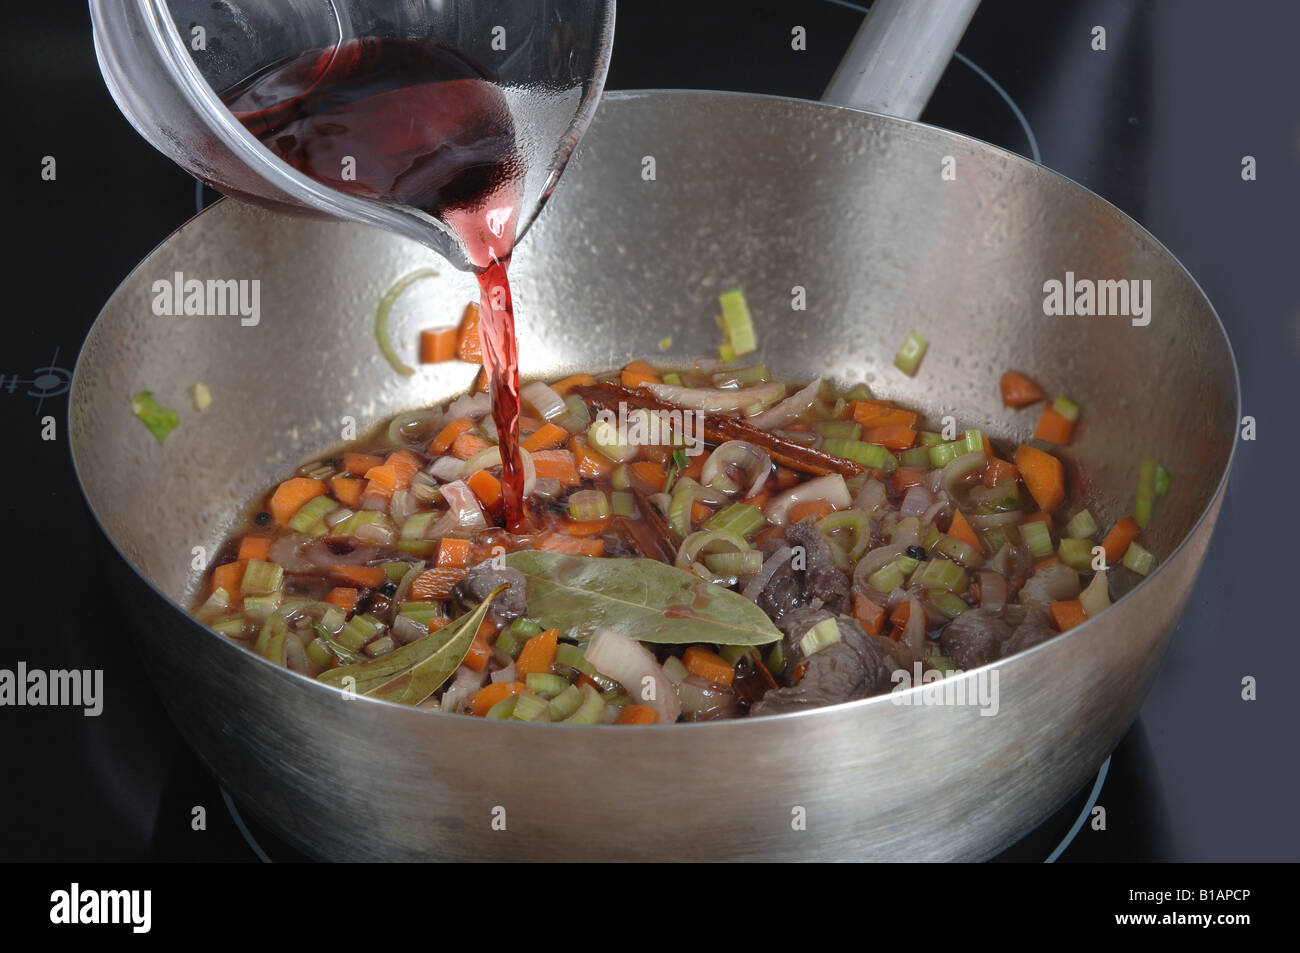 Pouring white wine to vegetables while frying lightly Stock Photo - Alamy